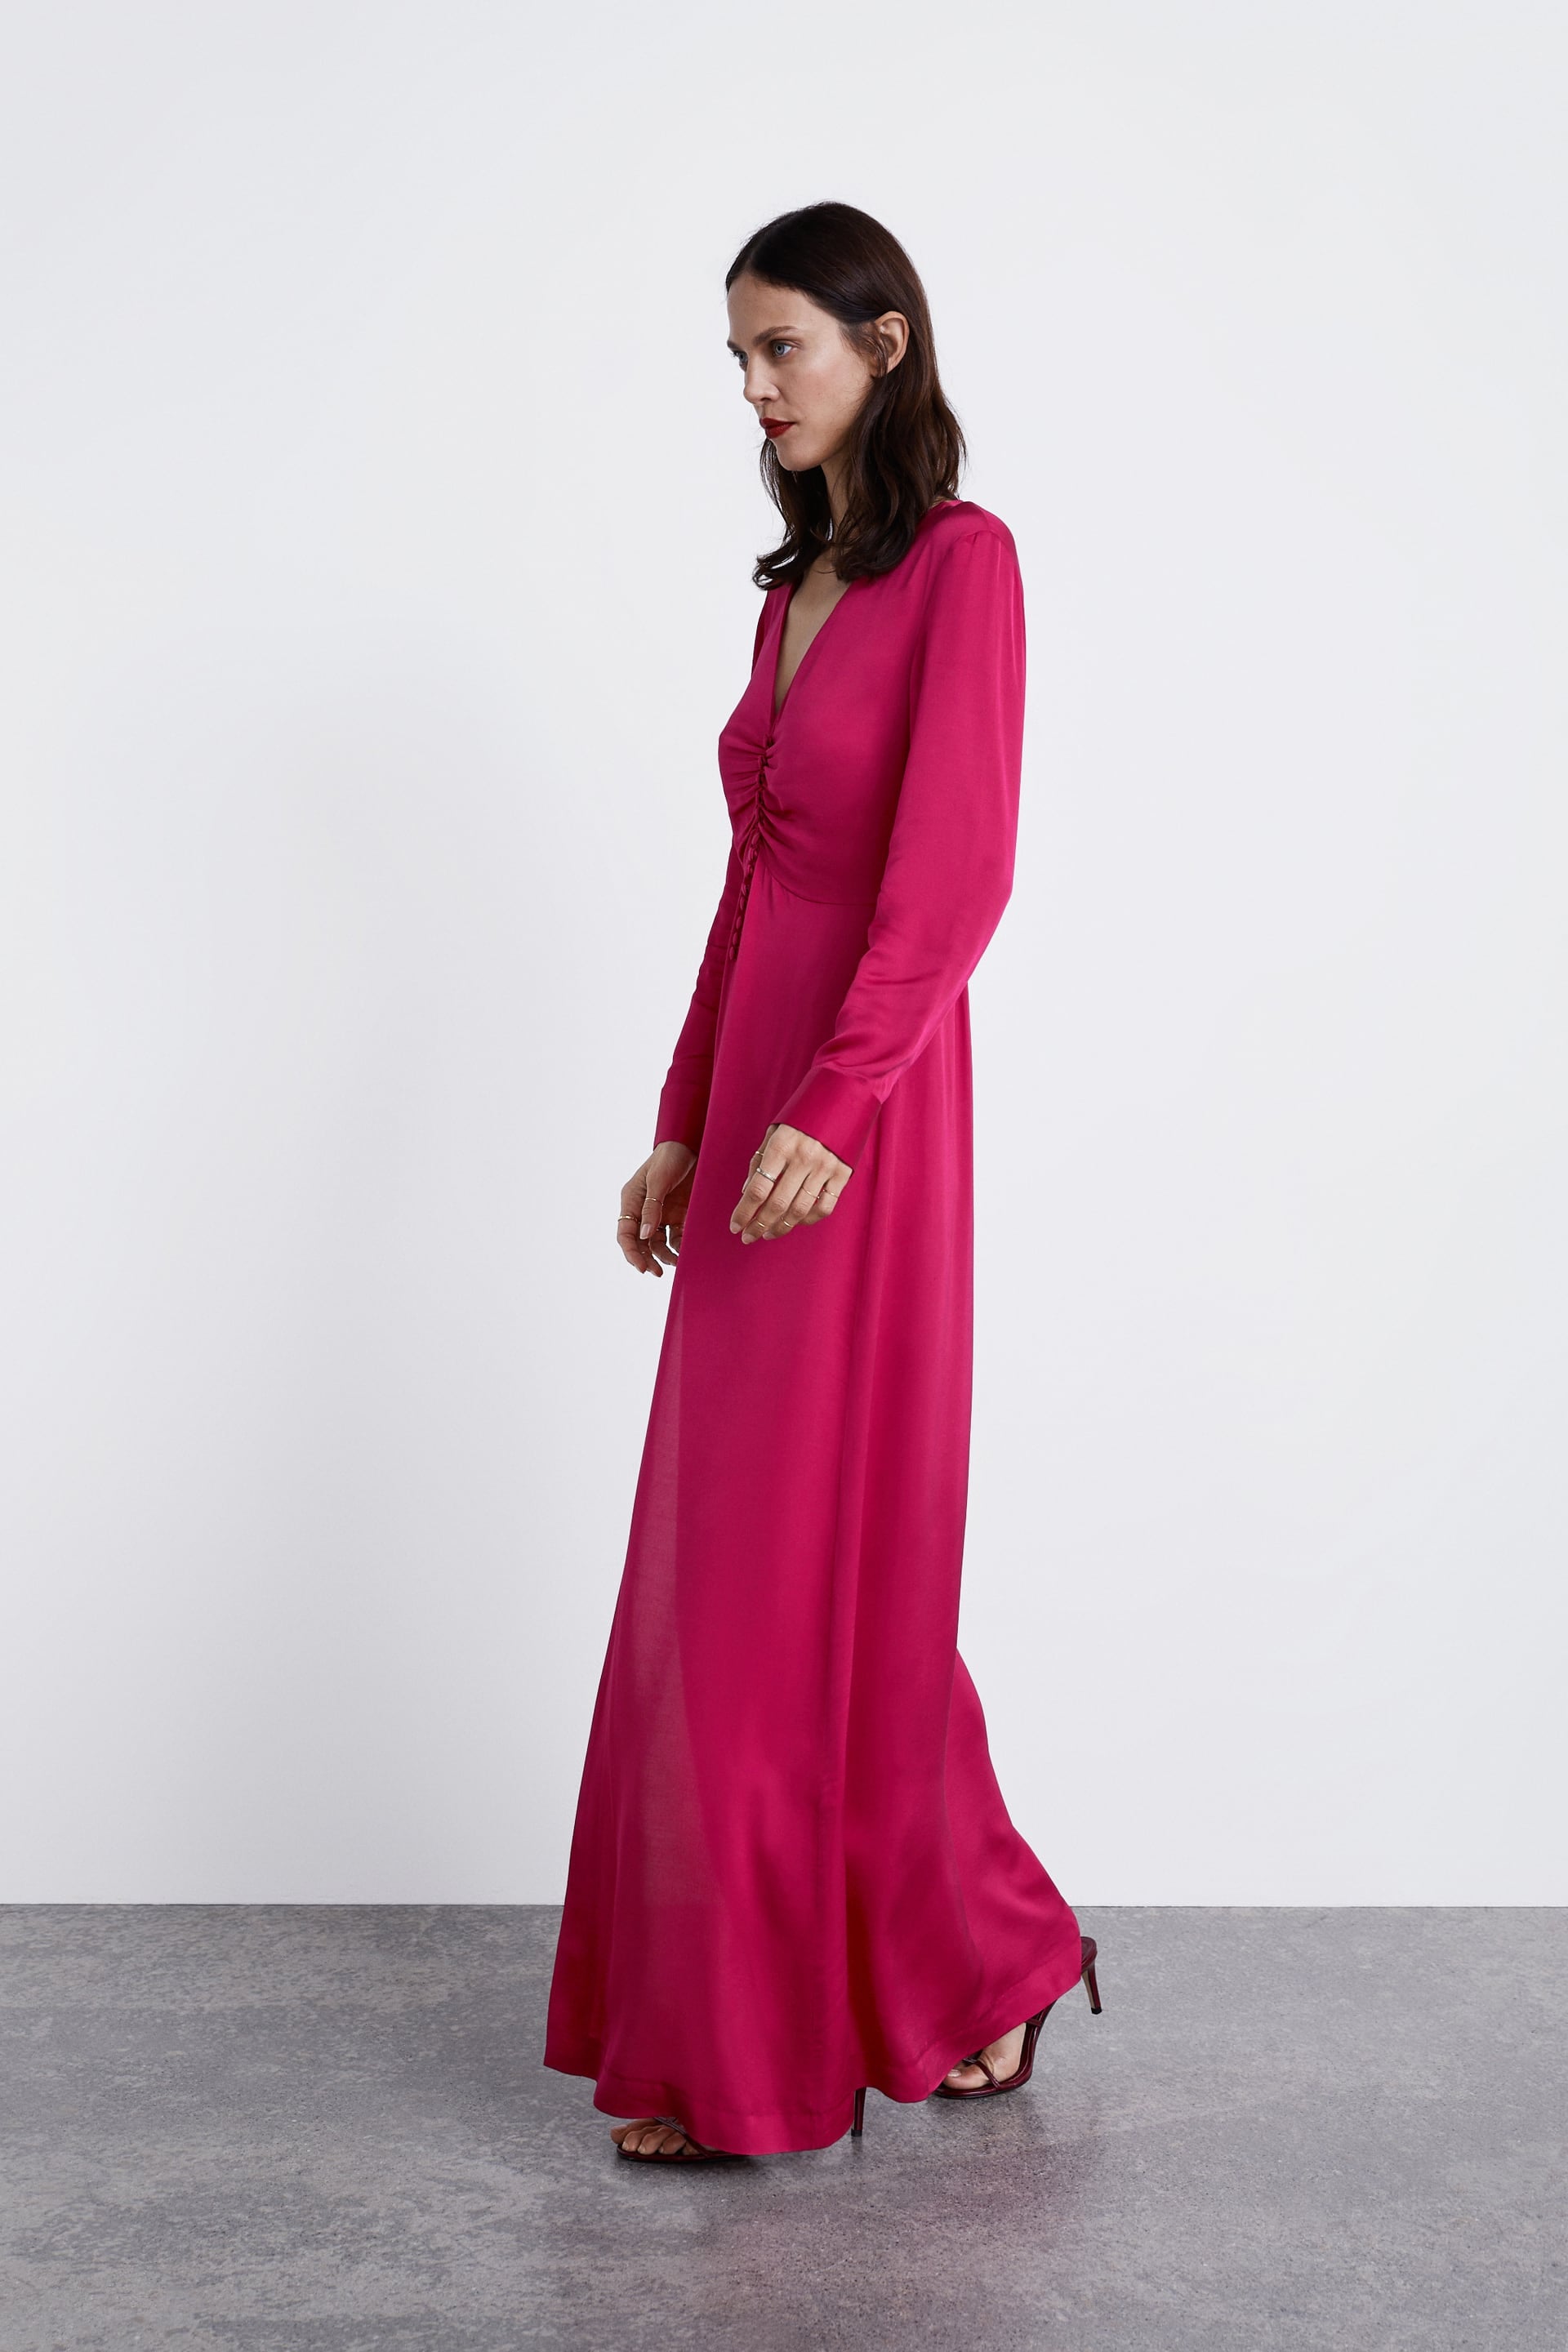 Zara Long Dress The Clothes That Will Make You Say I Keep